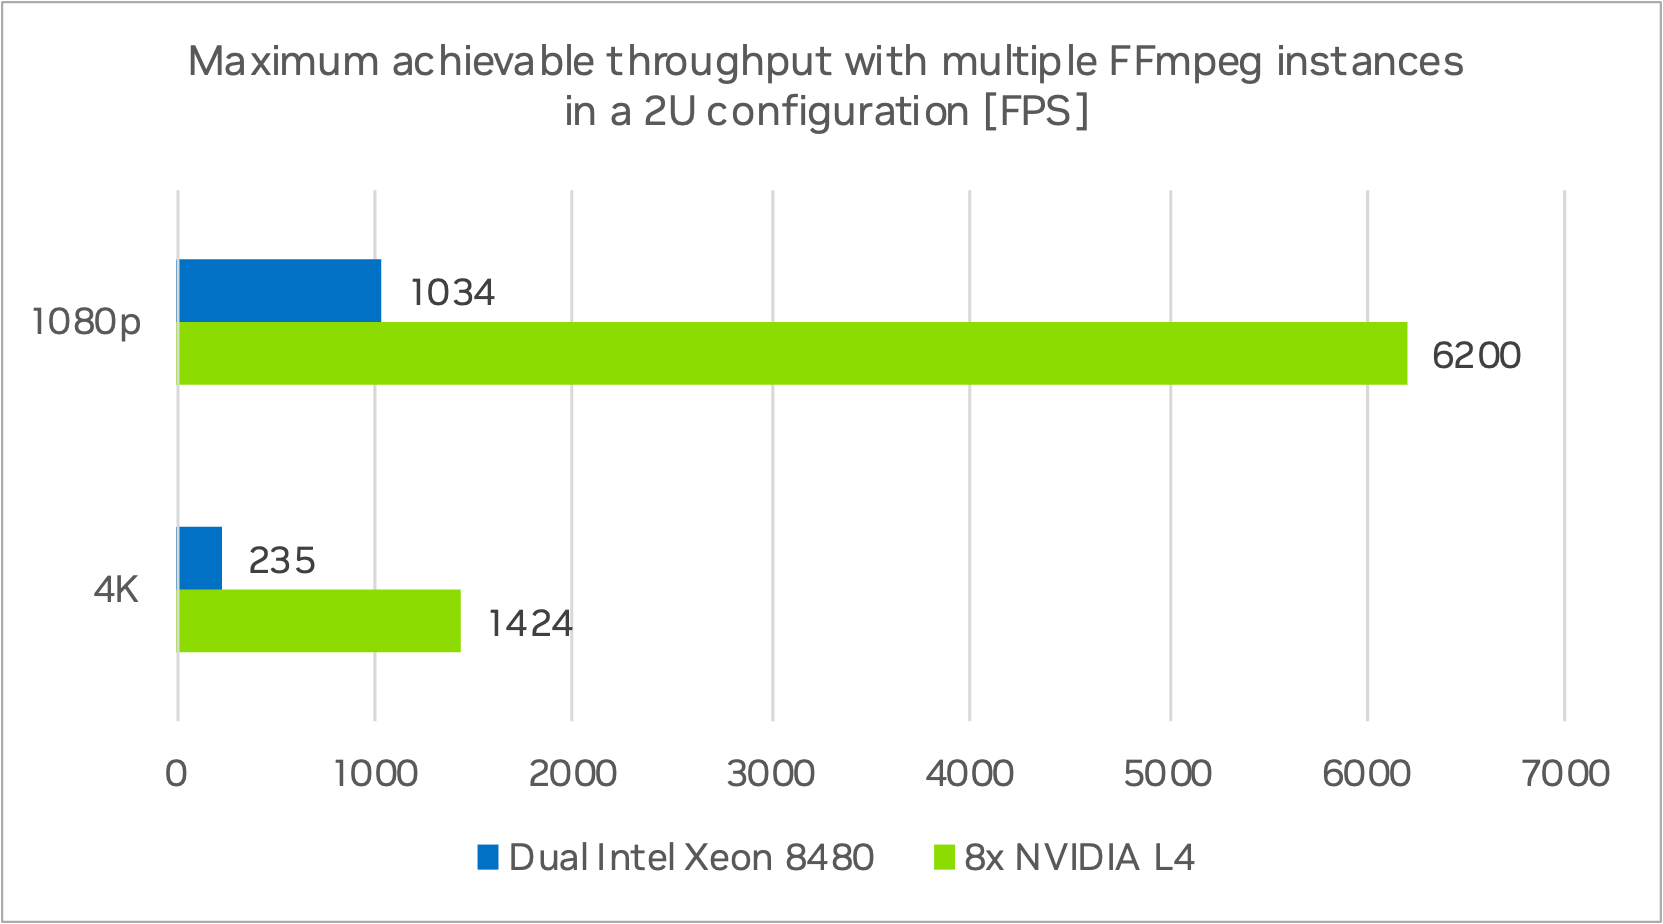 Achieved frame rate during VMAF calculation in FFmpeg. The chart compares the frame rate for a single video stream while calculating a VMAF score on an L4 vs Dual Intel Xeon 8480.